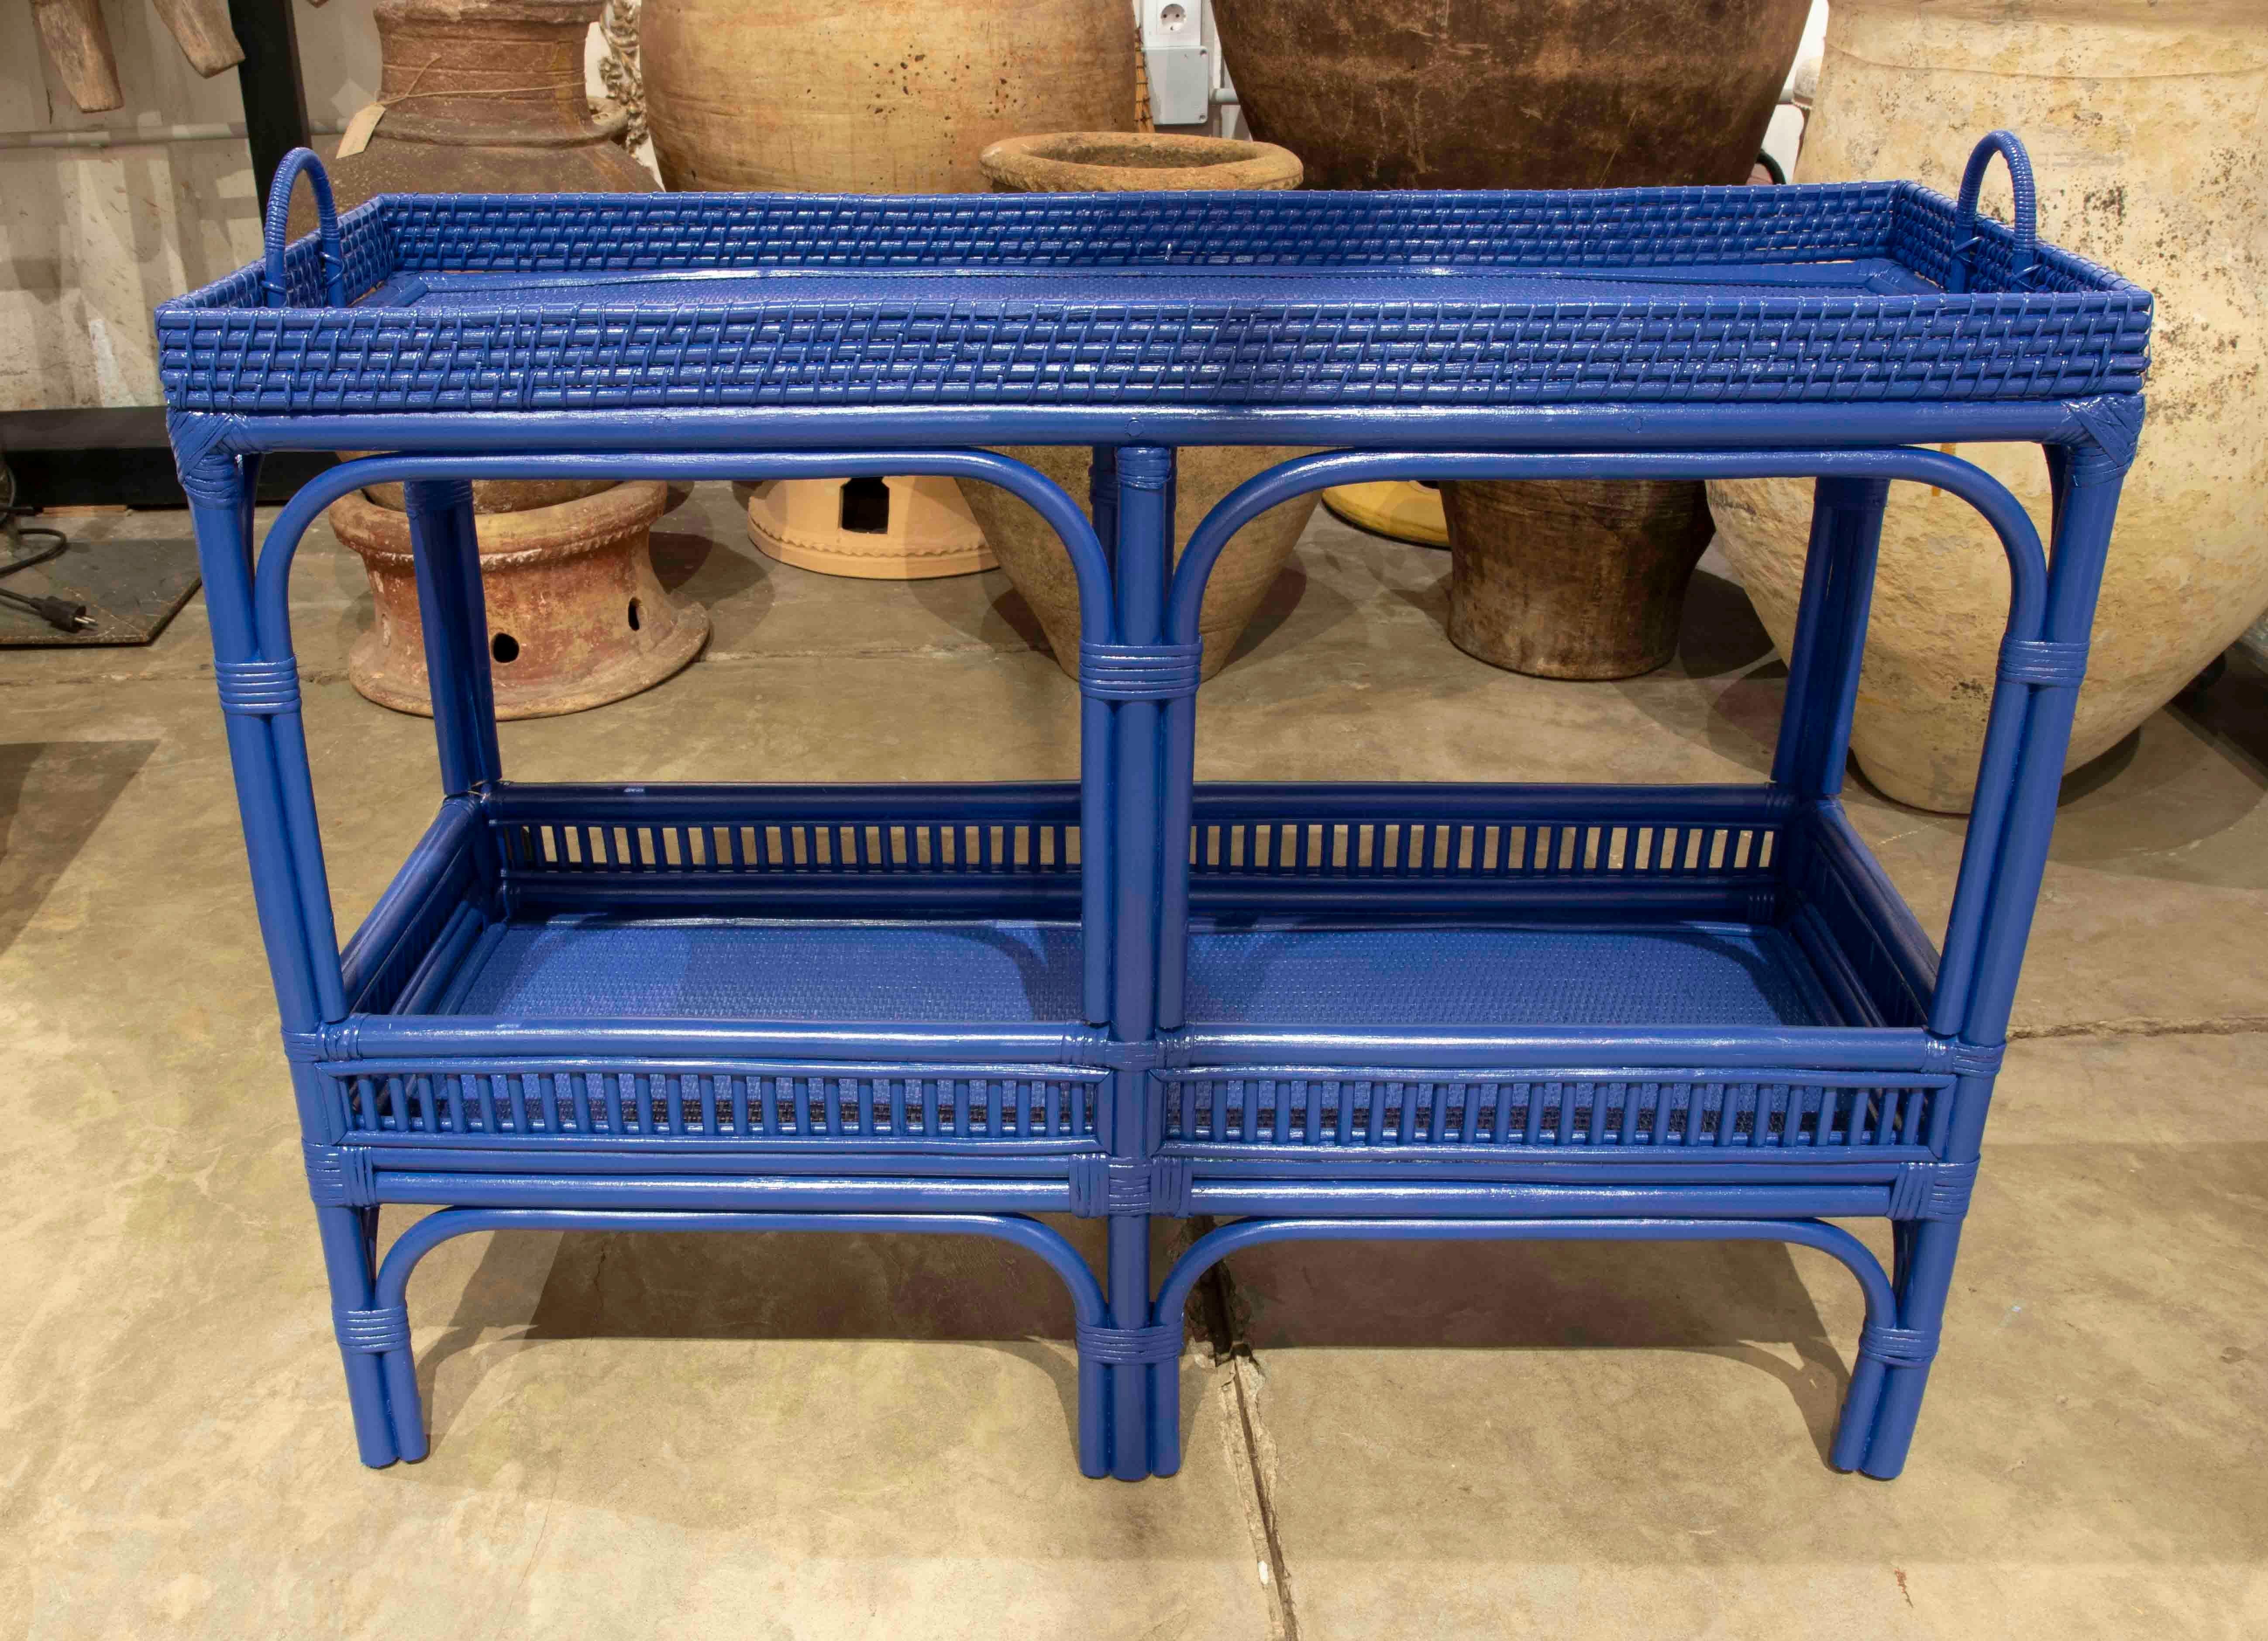 Spanish Rattan and Wicker Shelving Unit with Two Bar Shelves Painted in Blue